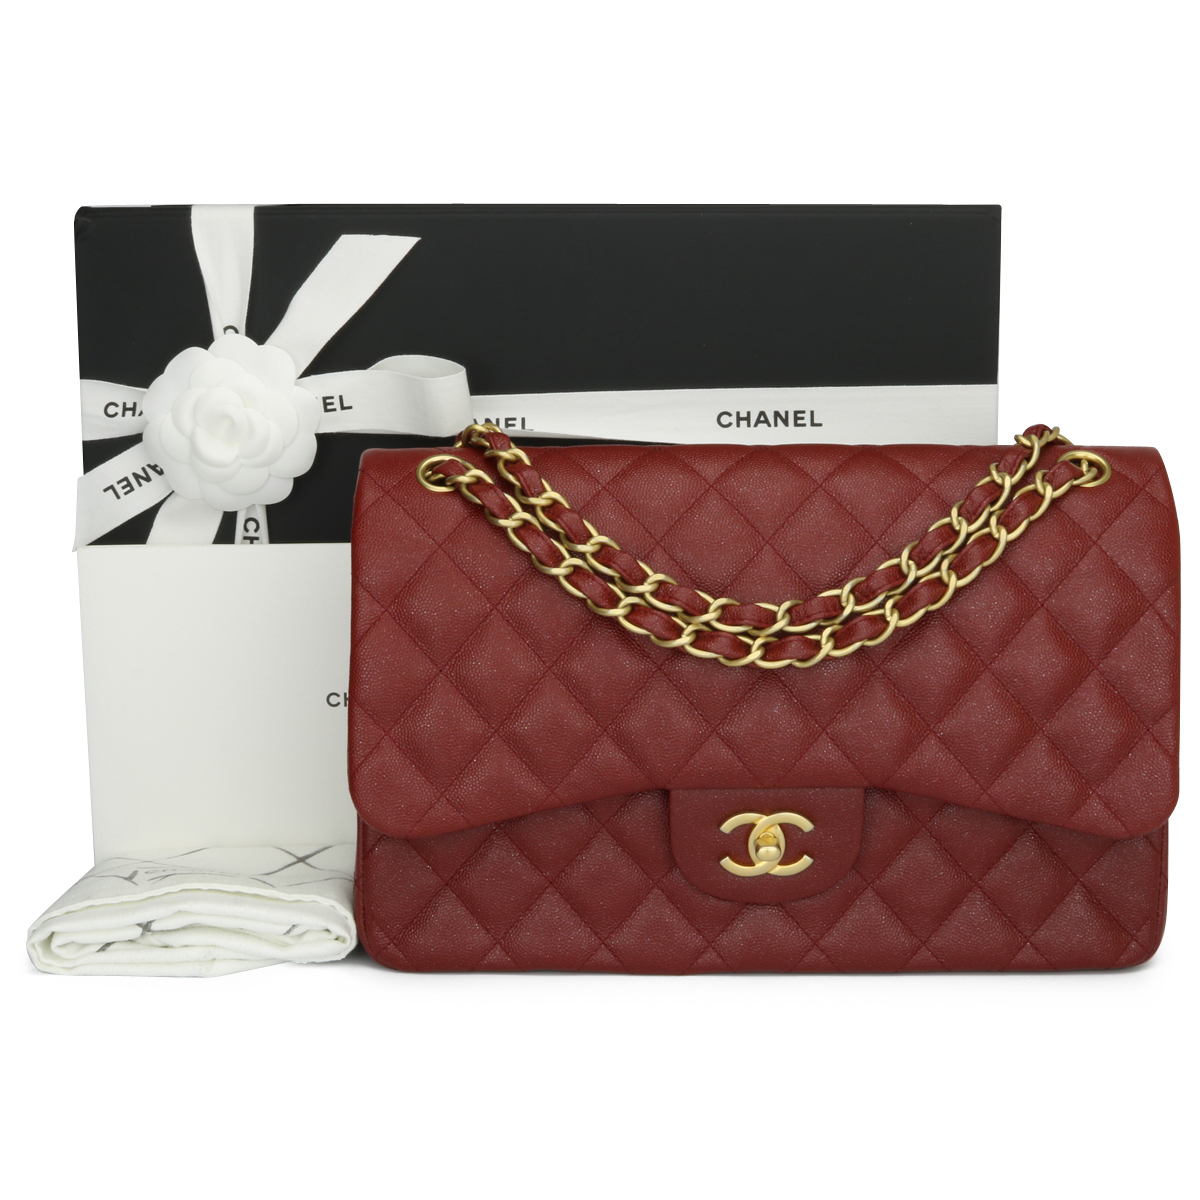 Unboxing Video - Chanel Medium Classic Flap in Burgundy Caviar Leather with  Champagne Gold Hardware! 